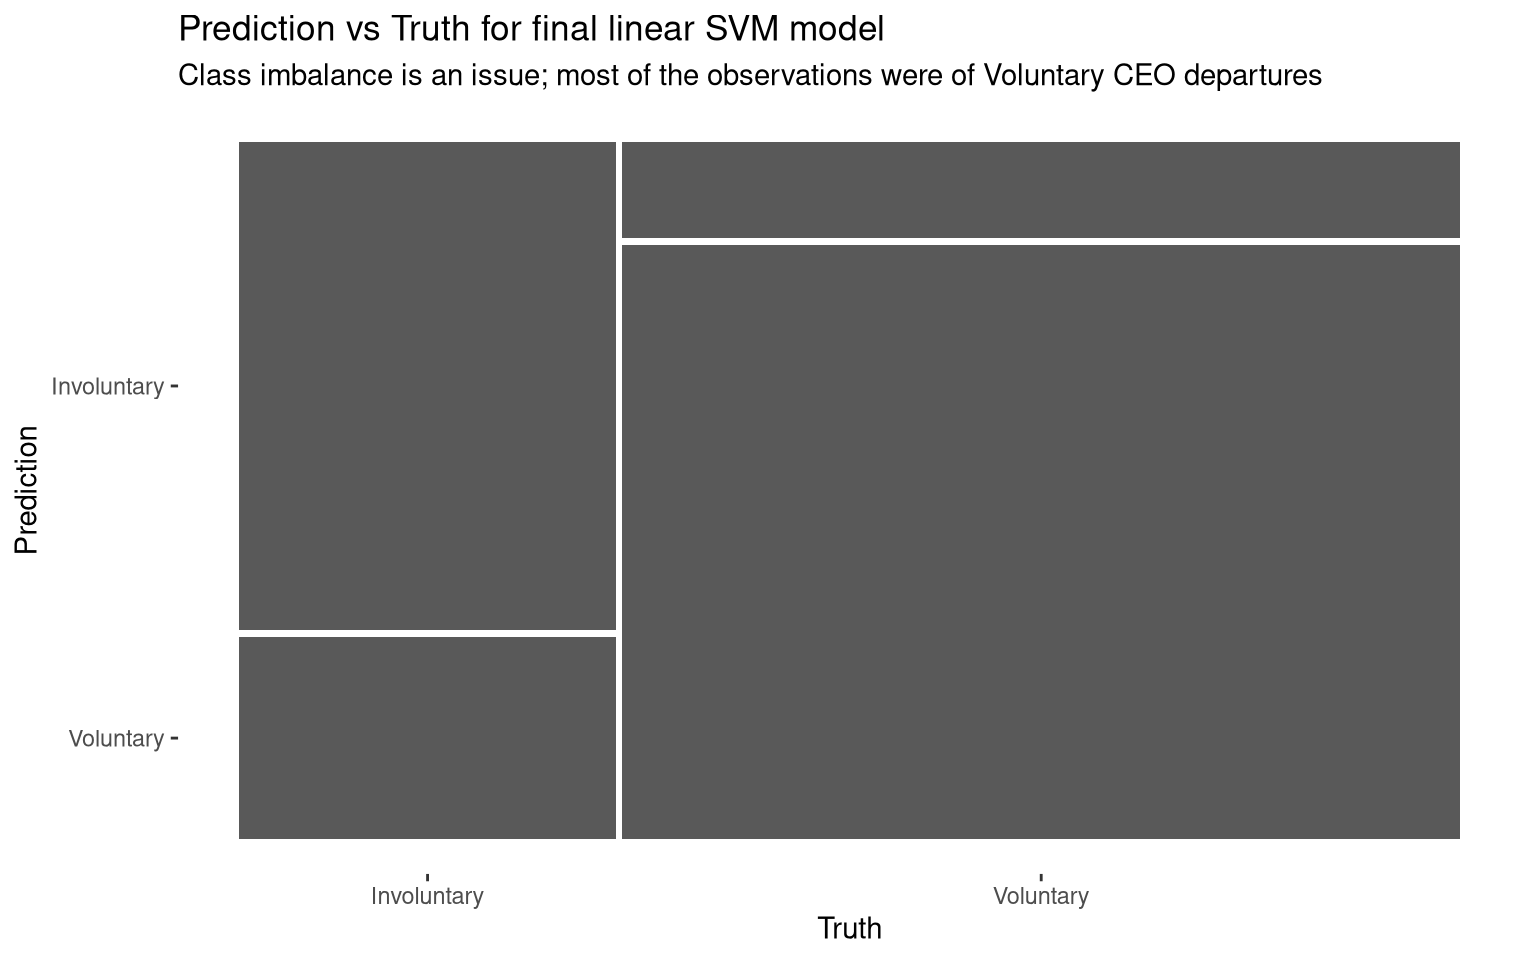 Confusion matrix for the final linear SVM model.